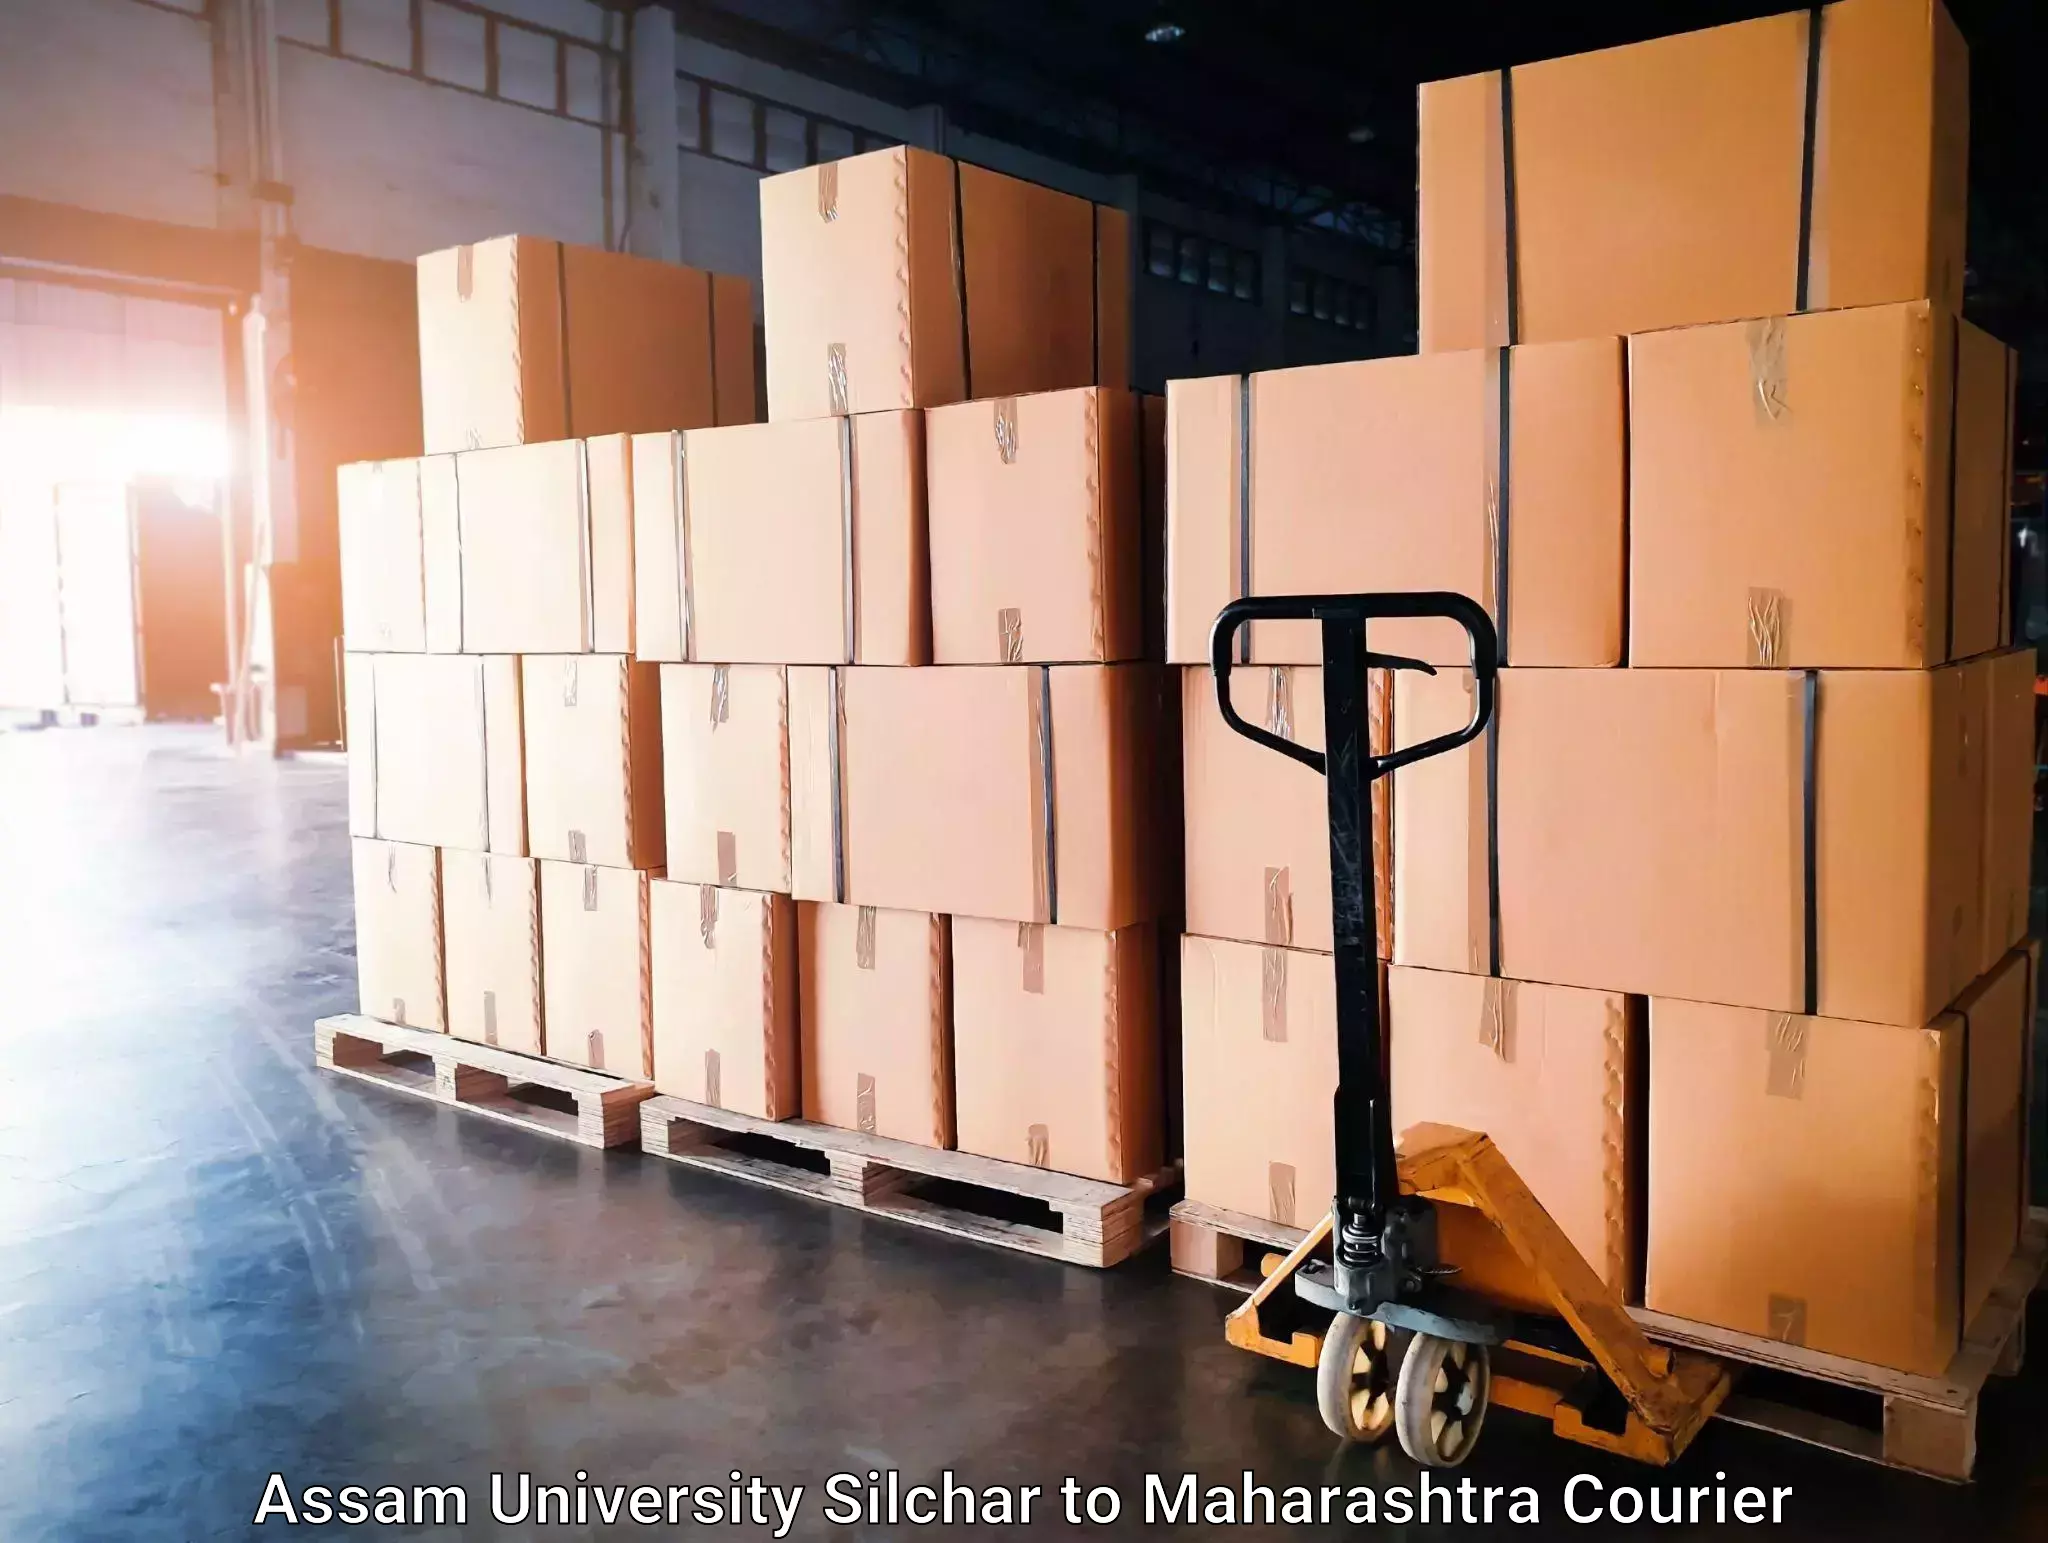 Global shipping networks Assam University Silchar to Talegaon Dabhade